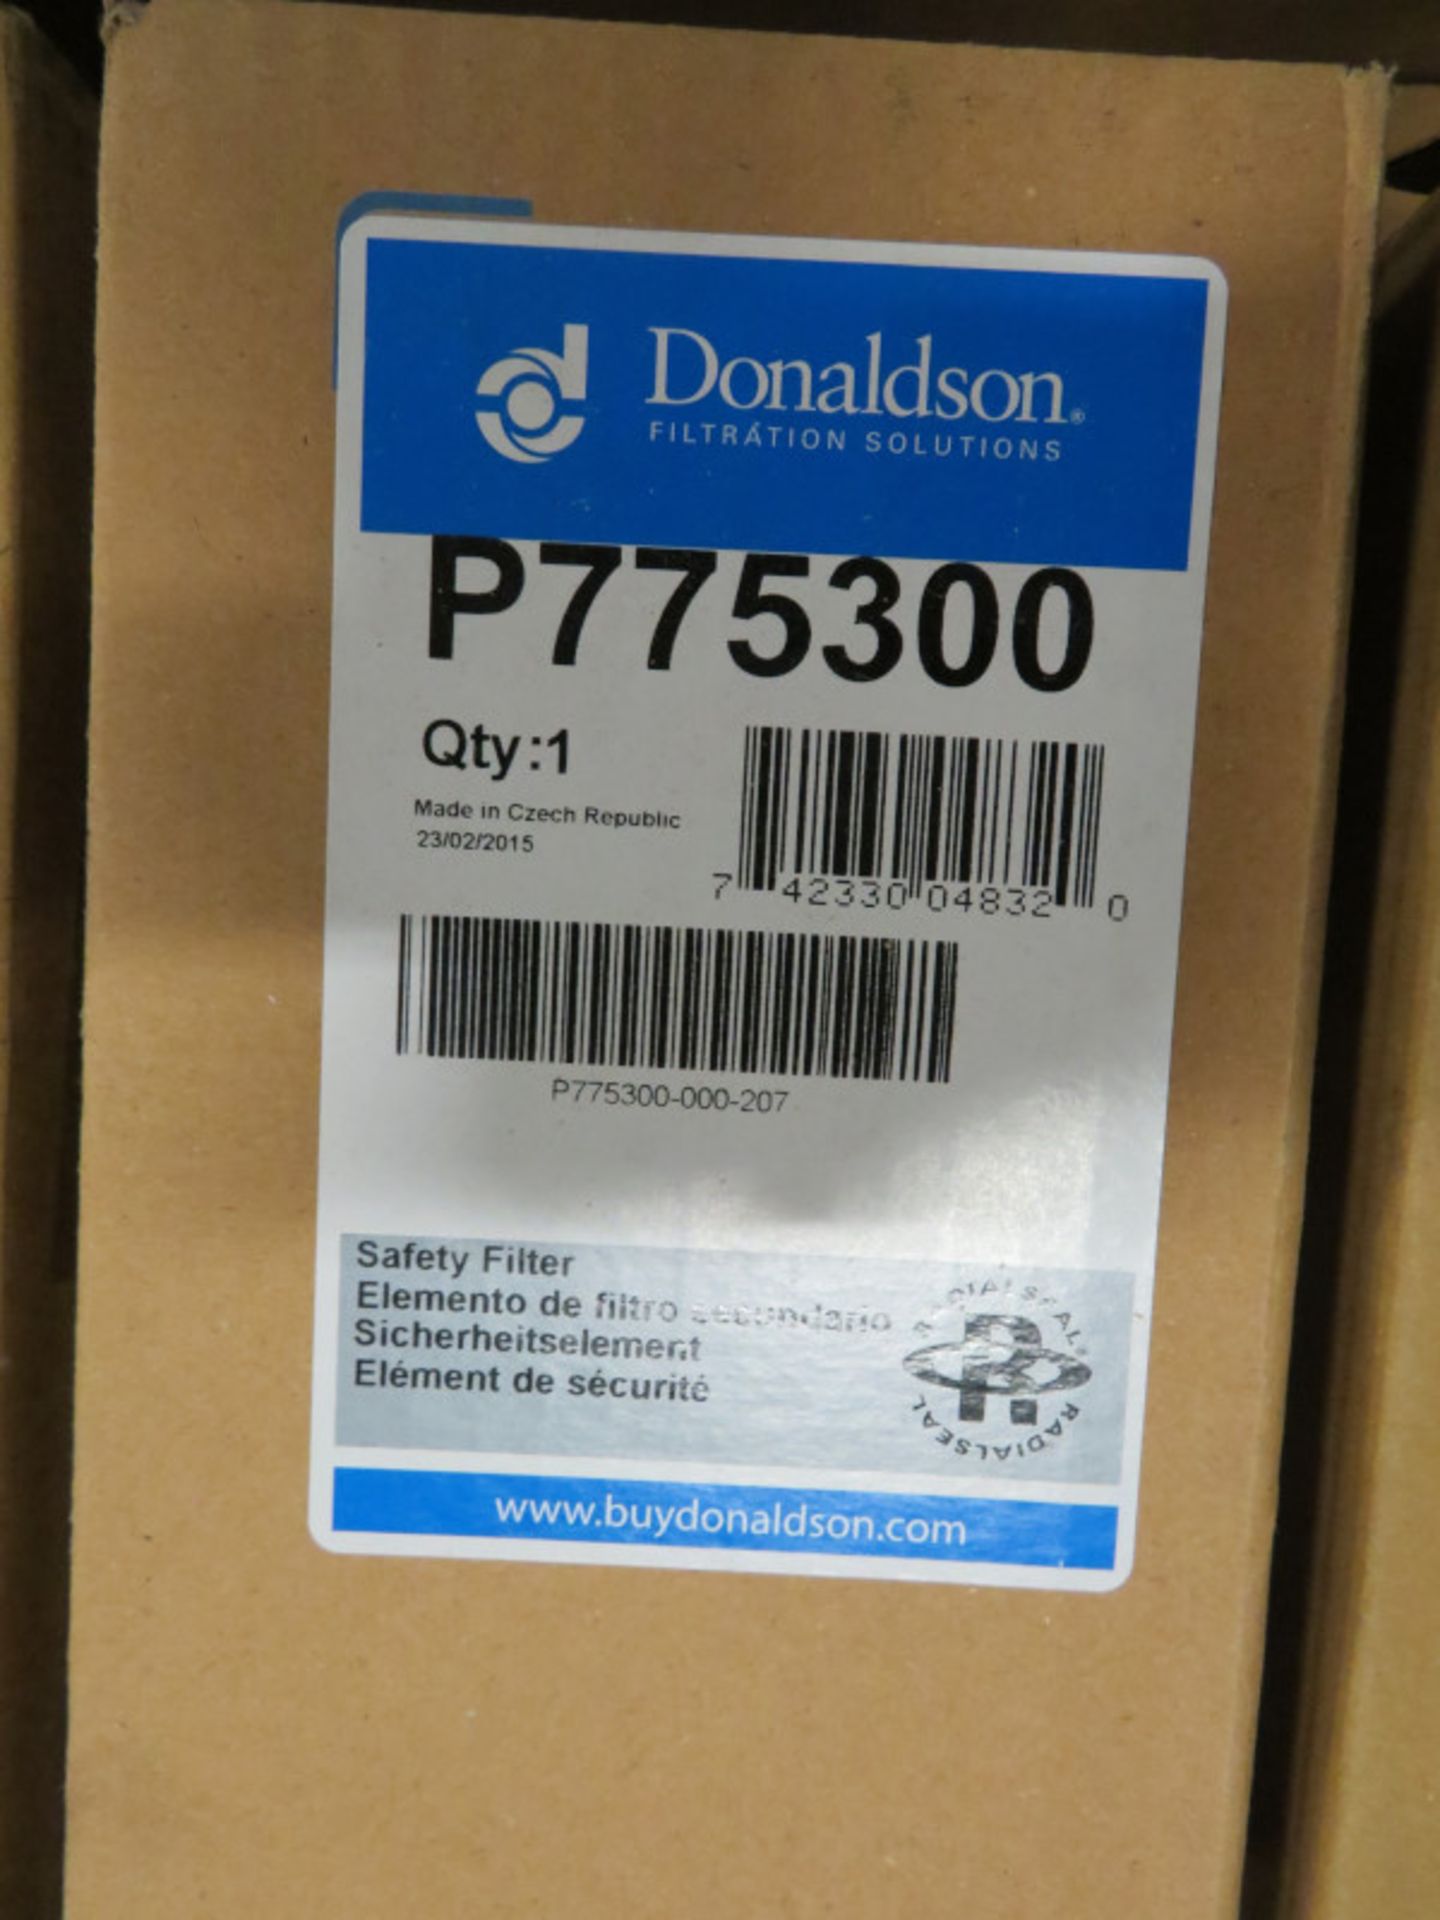 8x Donaldson P775300 Safety Filters - Image 3 of 3